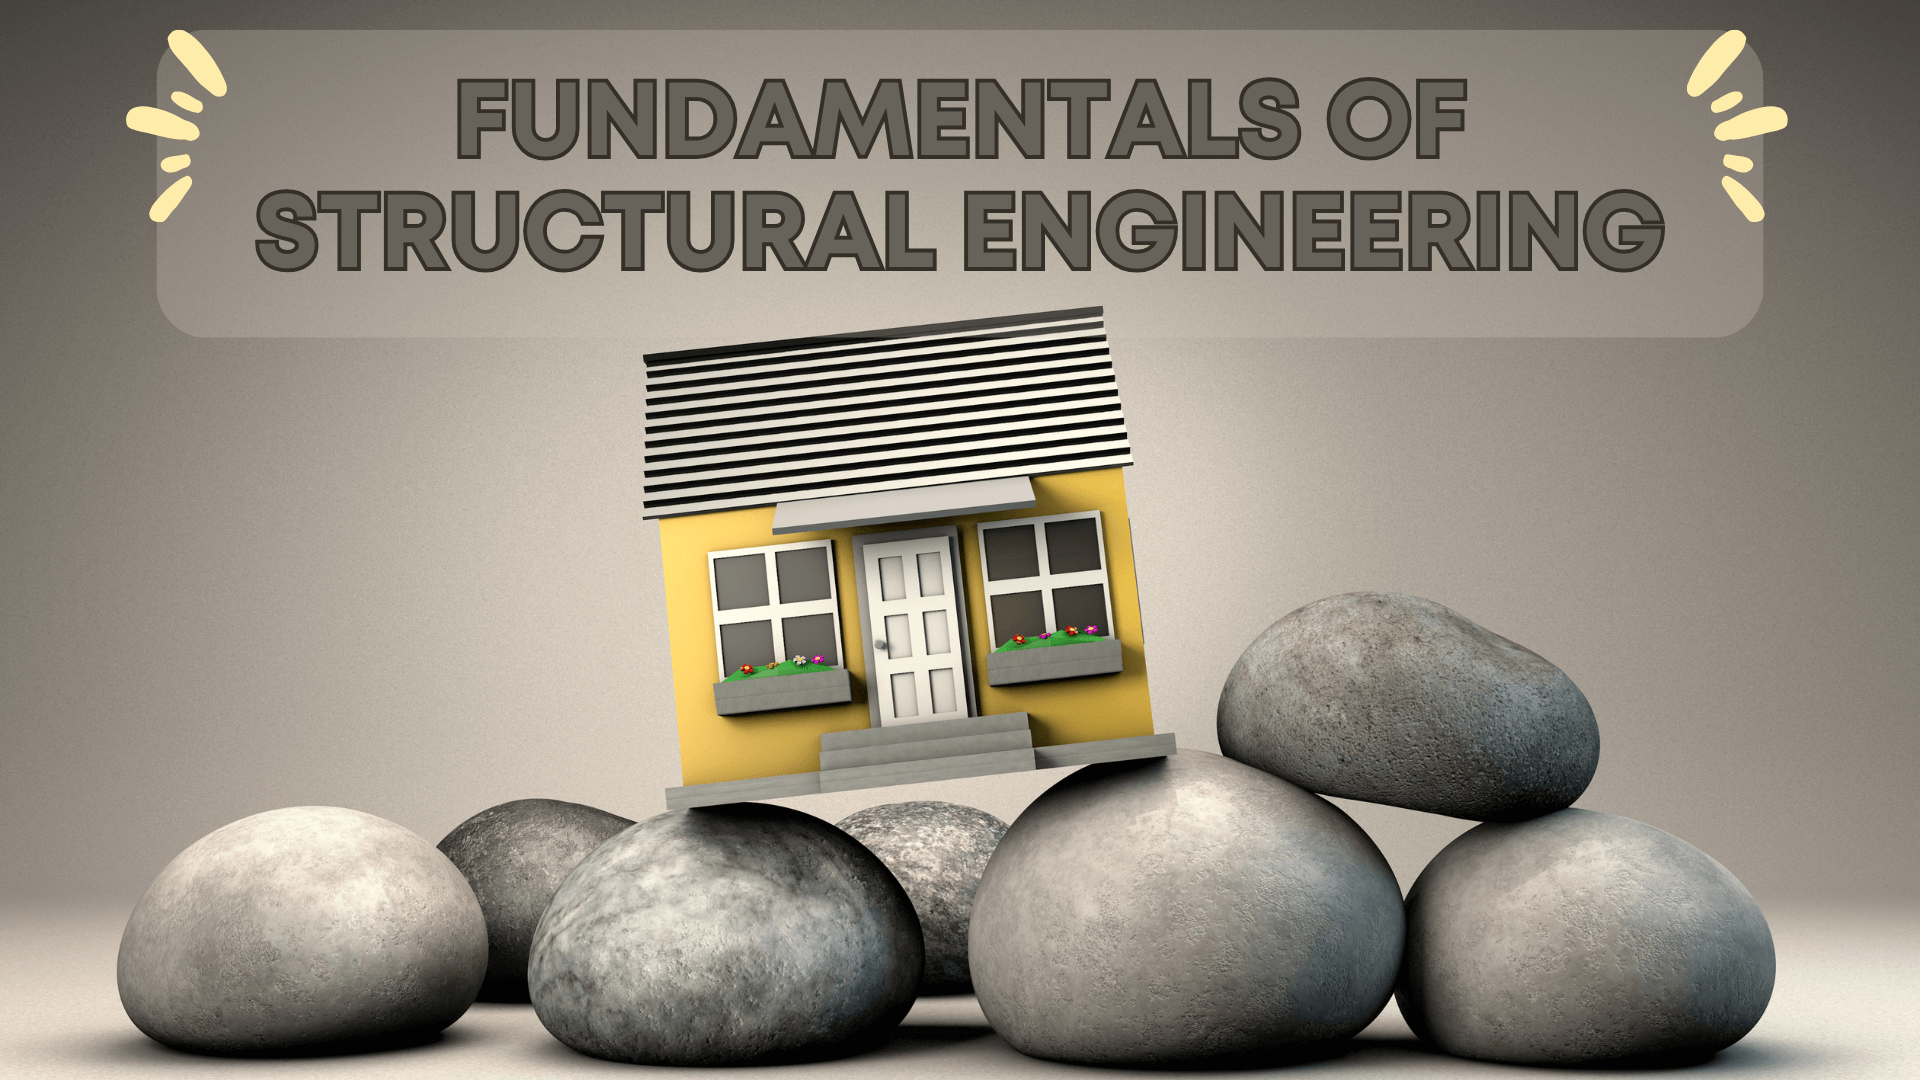 Fundamentals of Structural Engineering: Building Strong Foundations